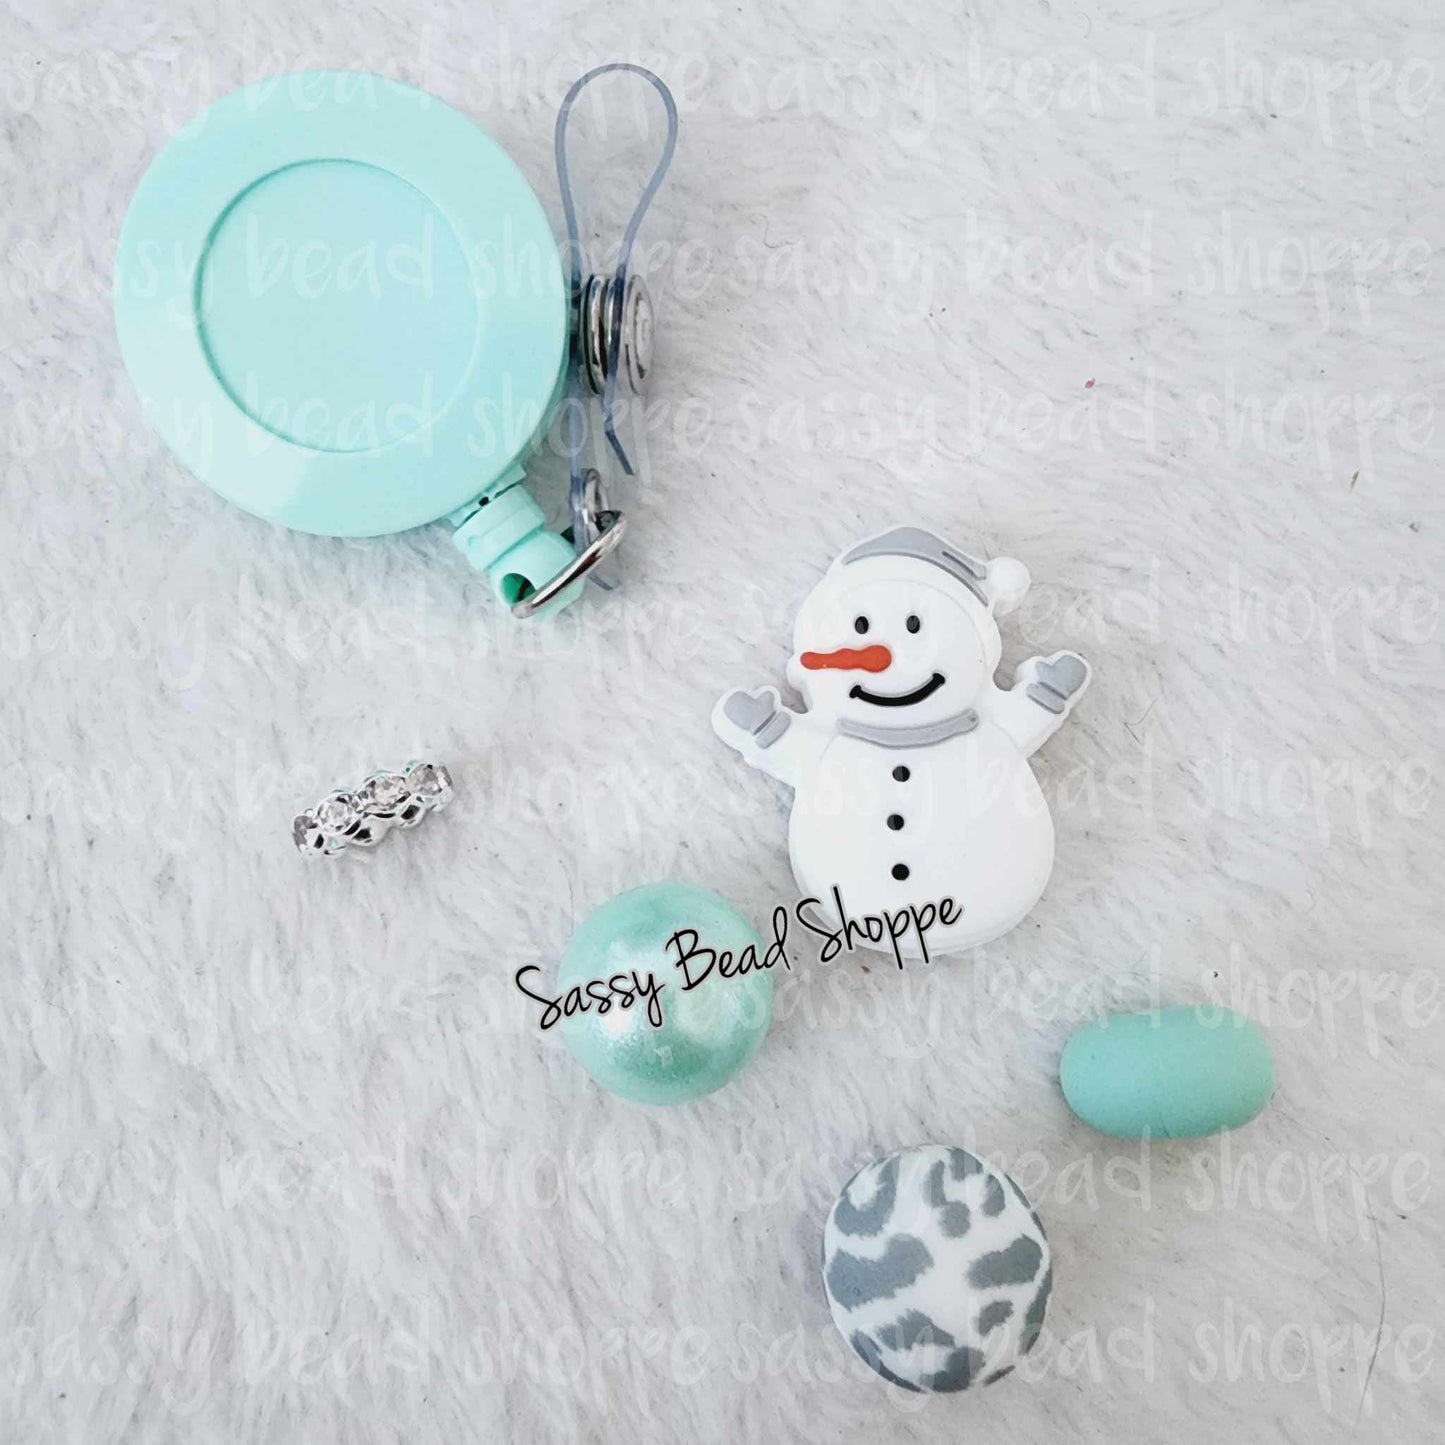 Sassy Bead Shoppe Frost Badge Reel What you will receive in your kit